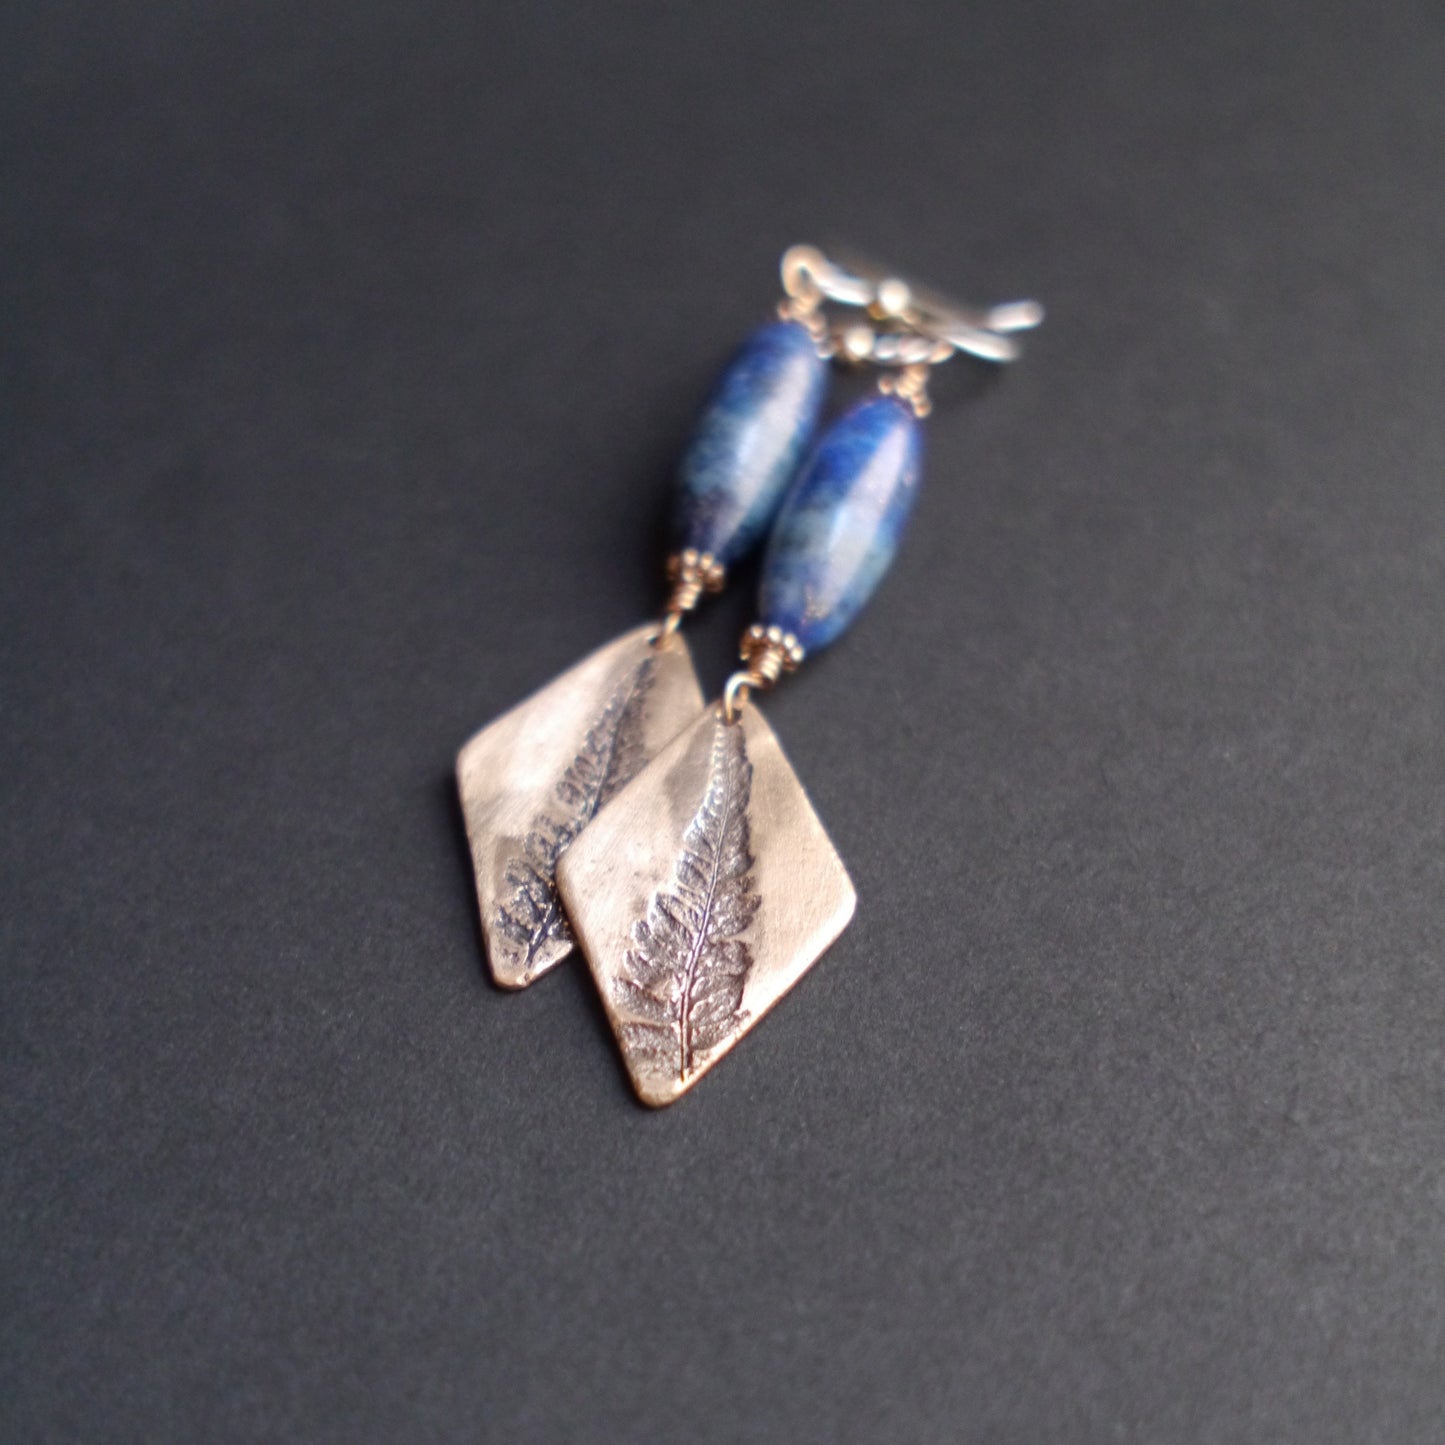 Natural Fern Earrings in Bronze with Lapis Lazuli (2)